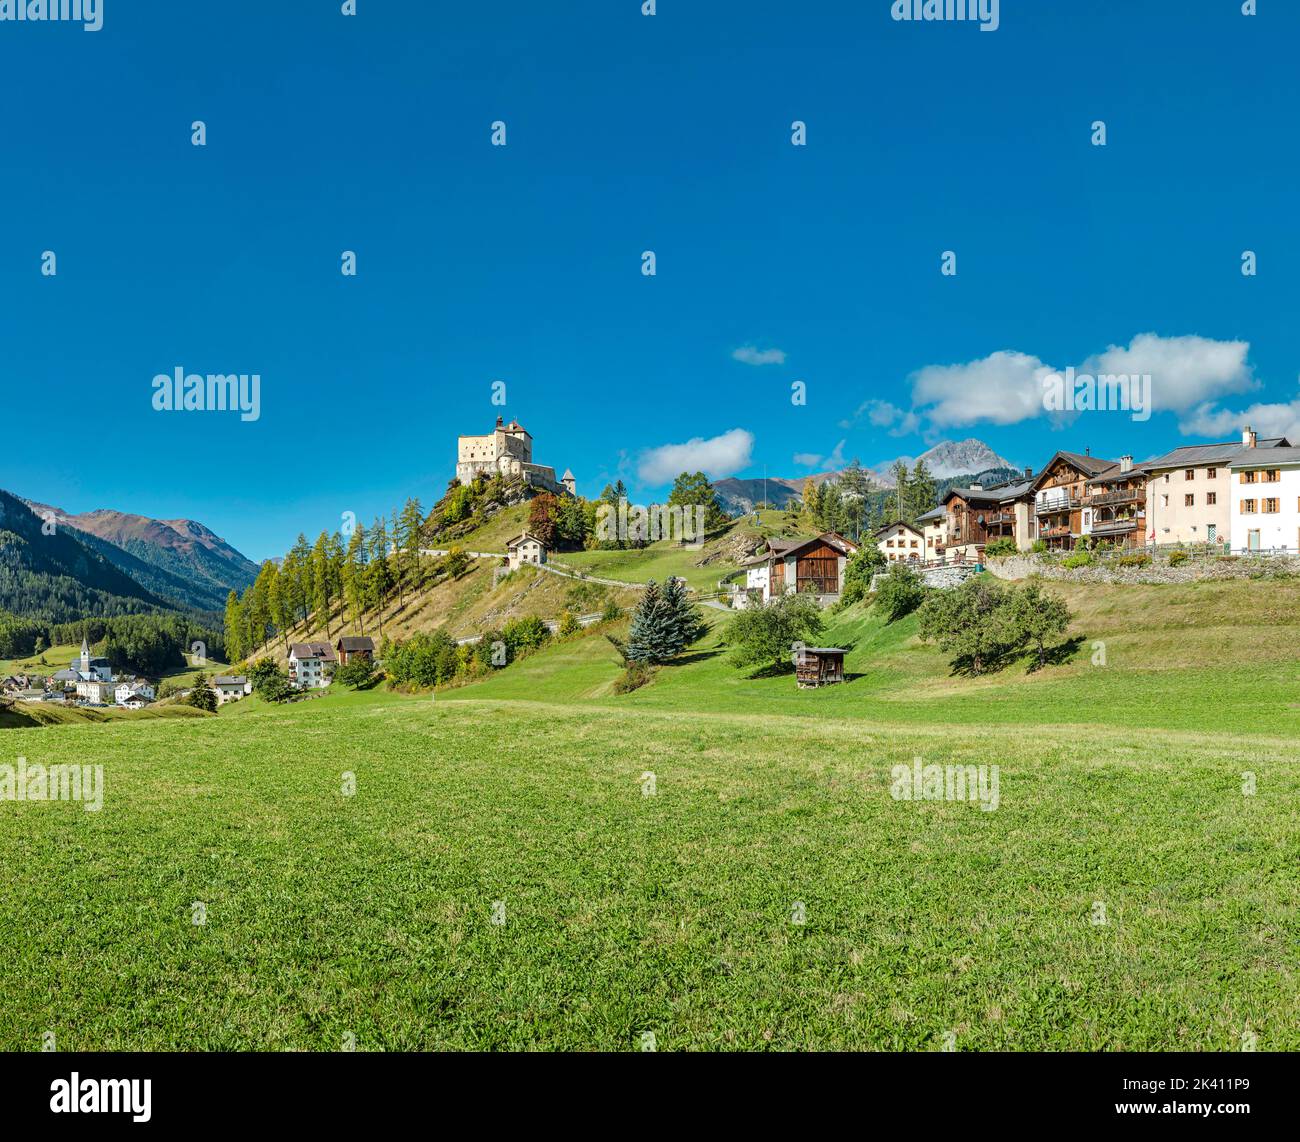 Tarasp castle with scattered houses of the village *** Local Caption ***  Tarasp - Scuol,  Graubünden, Switzerland, city, village, field, meadow, autu Stock Photo